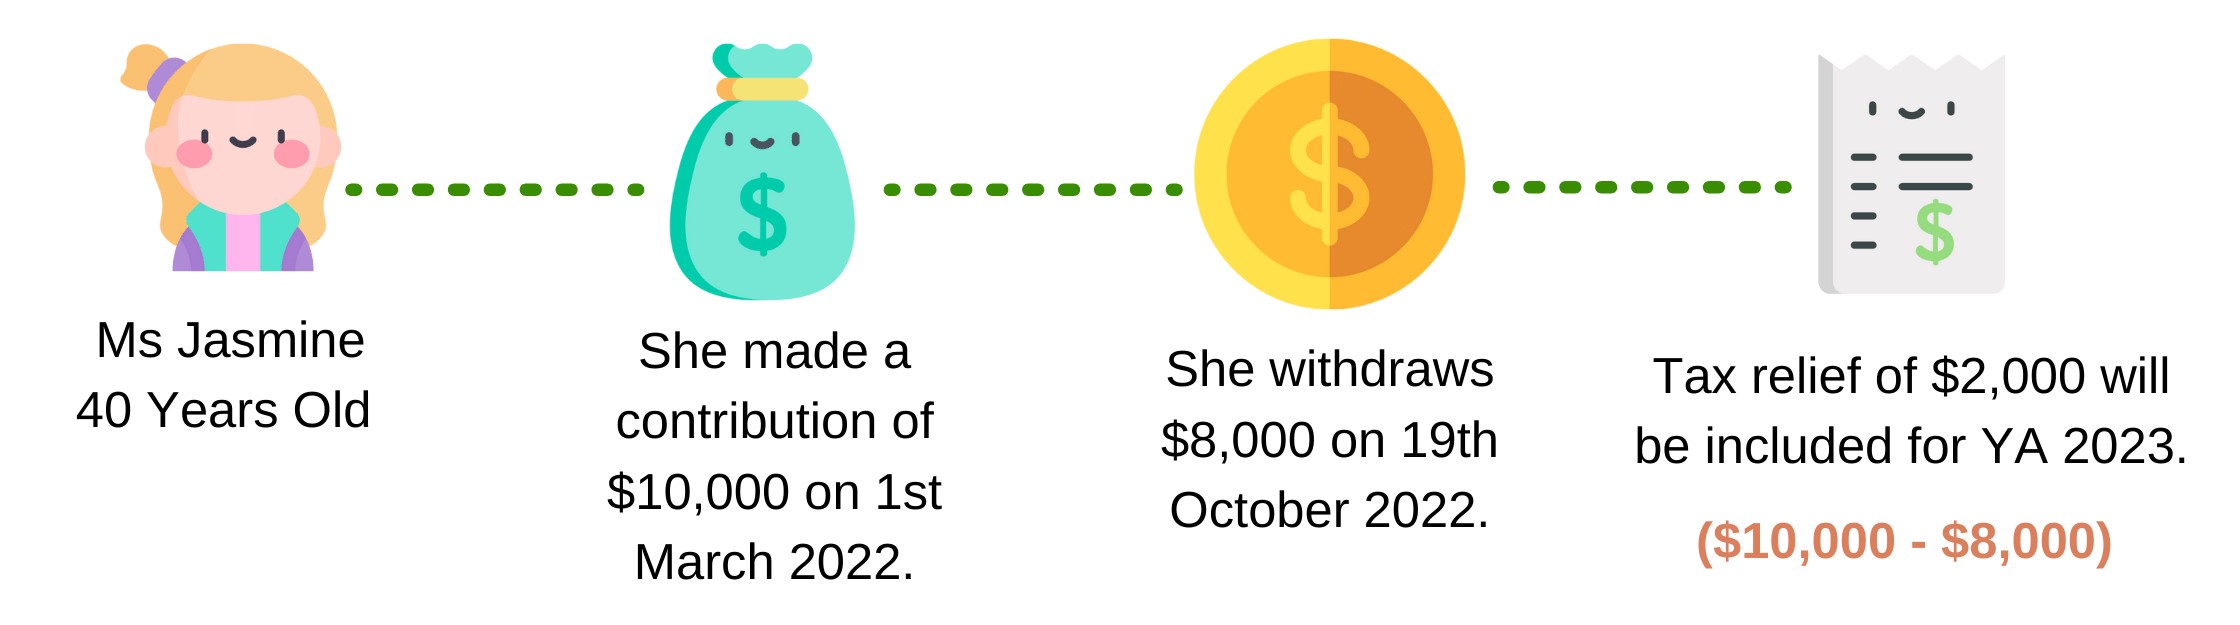 Contribution made before withdrawal in the same year, where withdrawal is less than the amount contributed